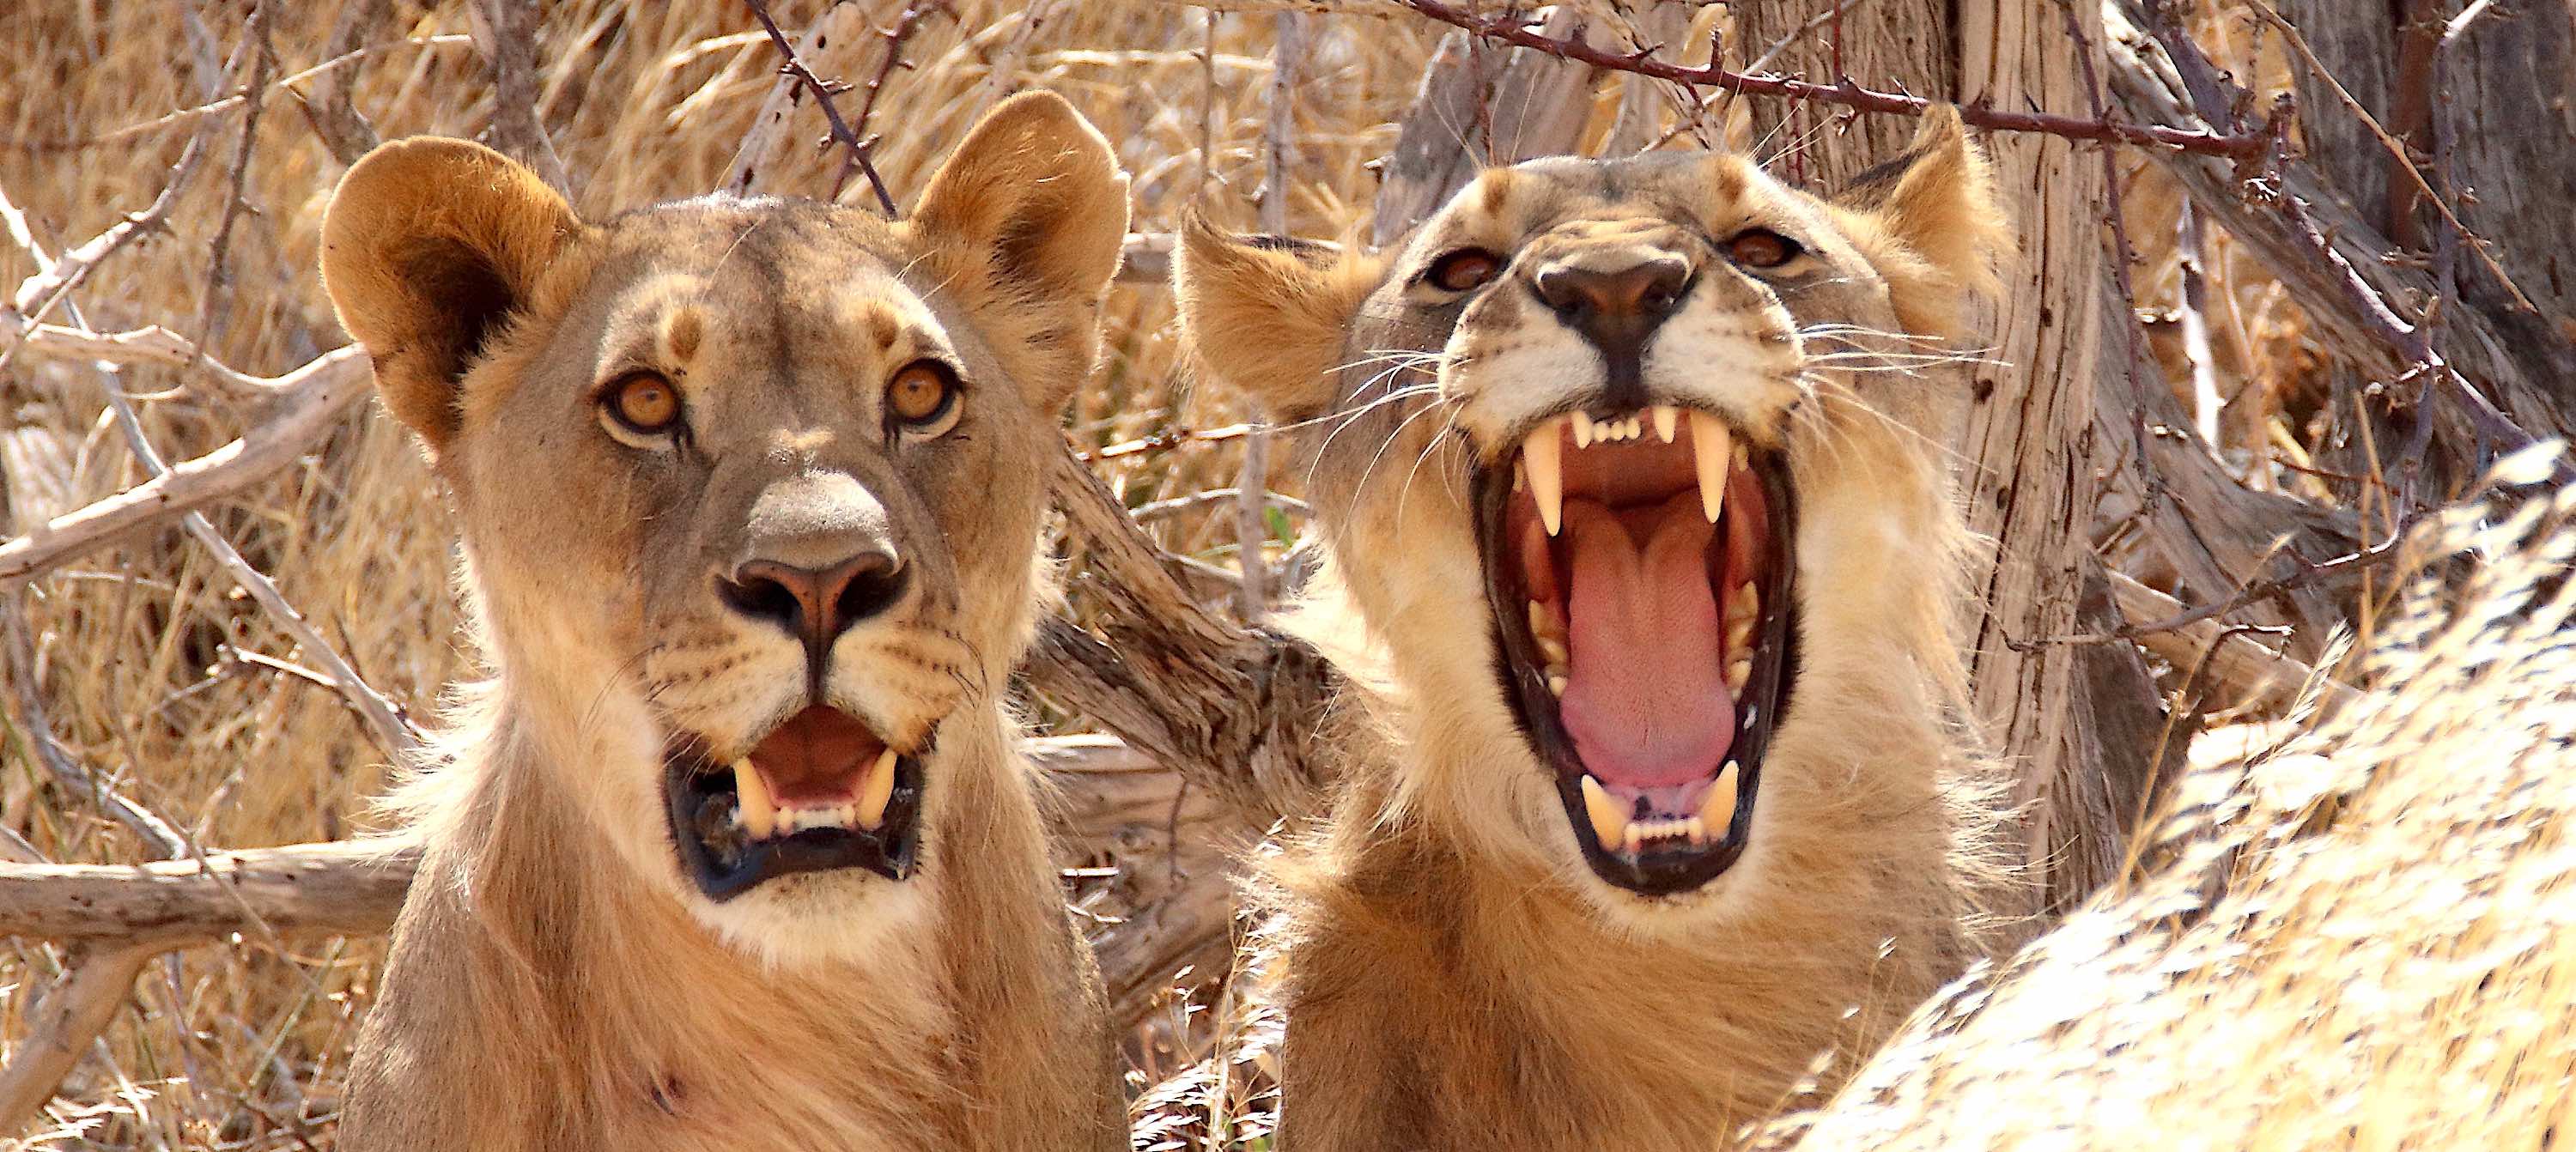 Close up of two lions, one of whom is roaring, or possibly yawning.